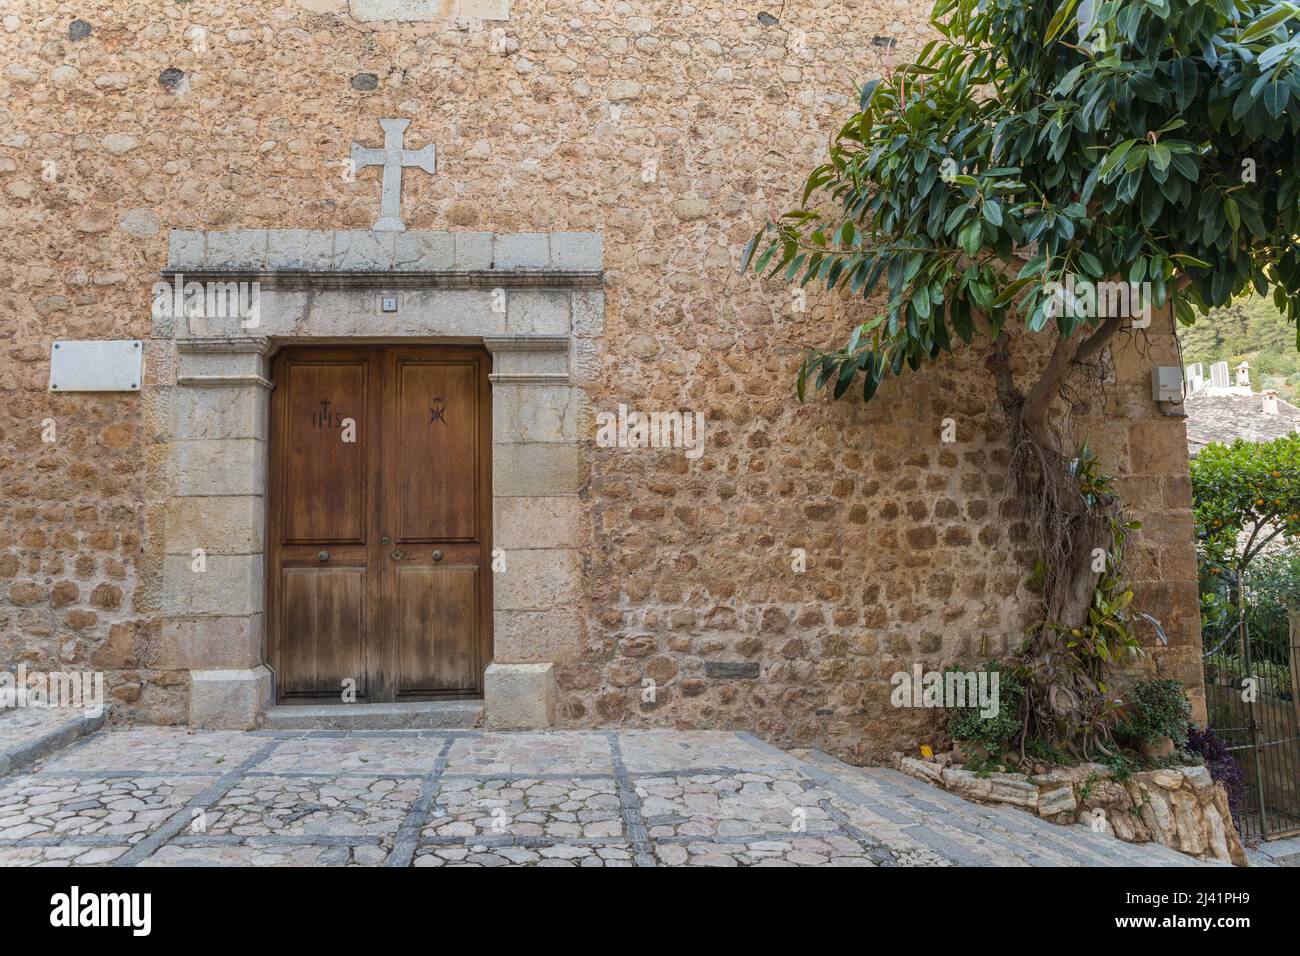 The door of the old church in Fornalutx, Soller area. Majorca. Balearic Islands, Spain. Stock Photo